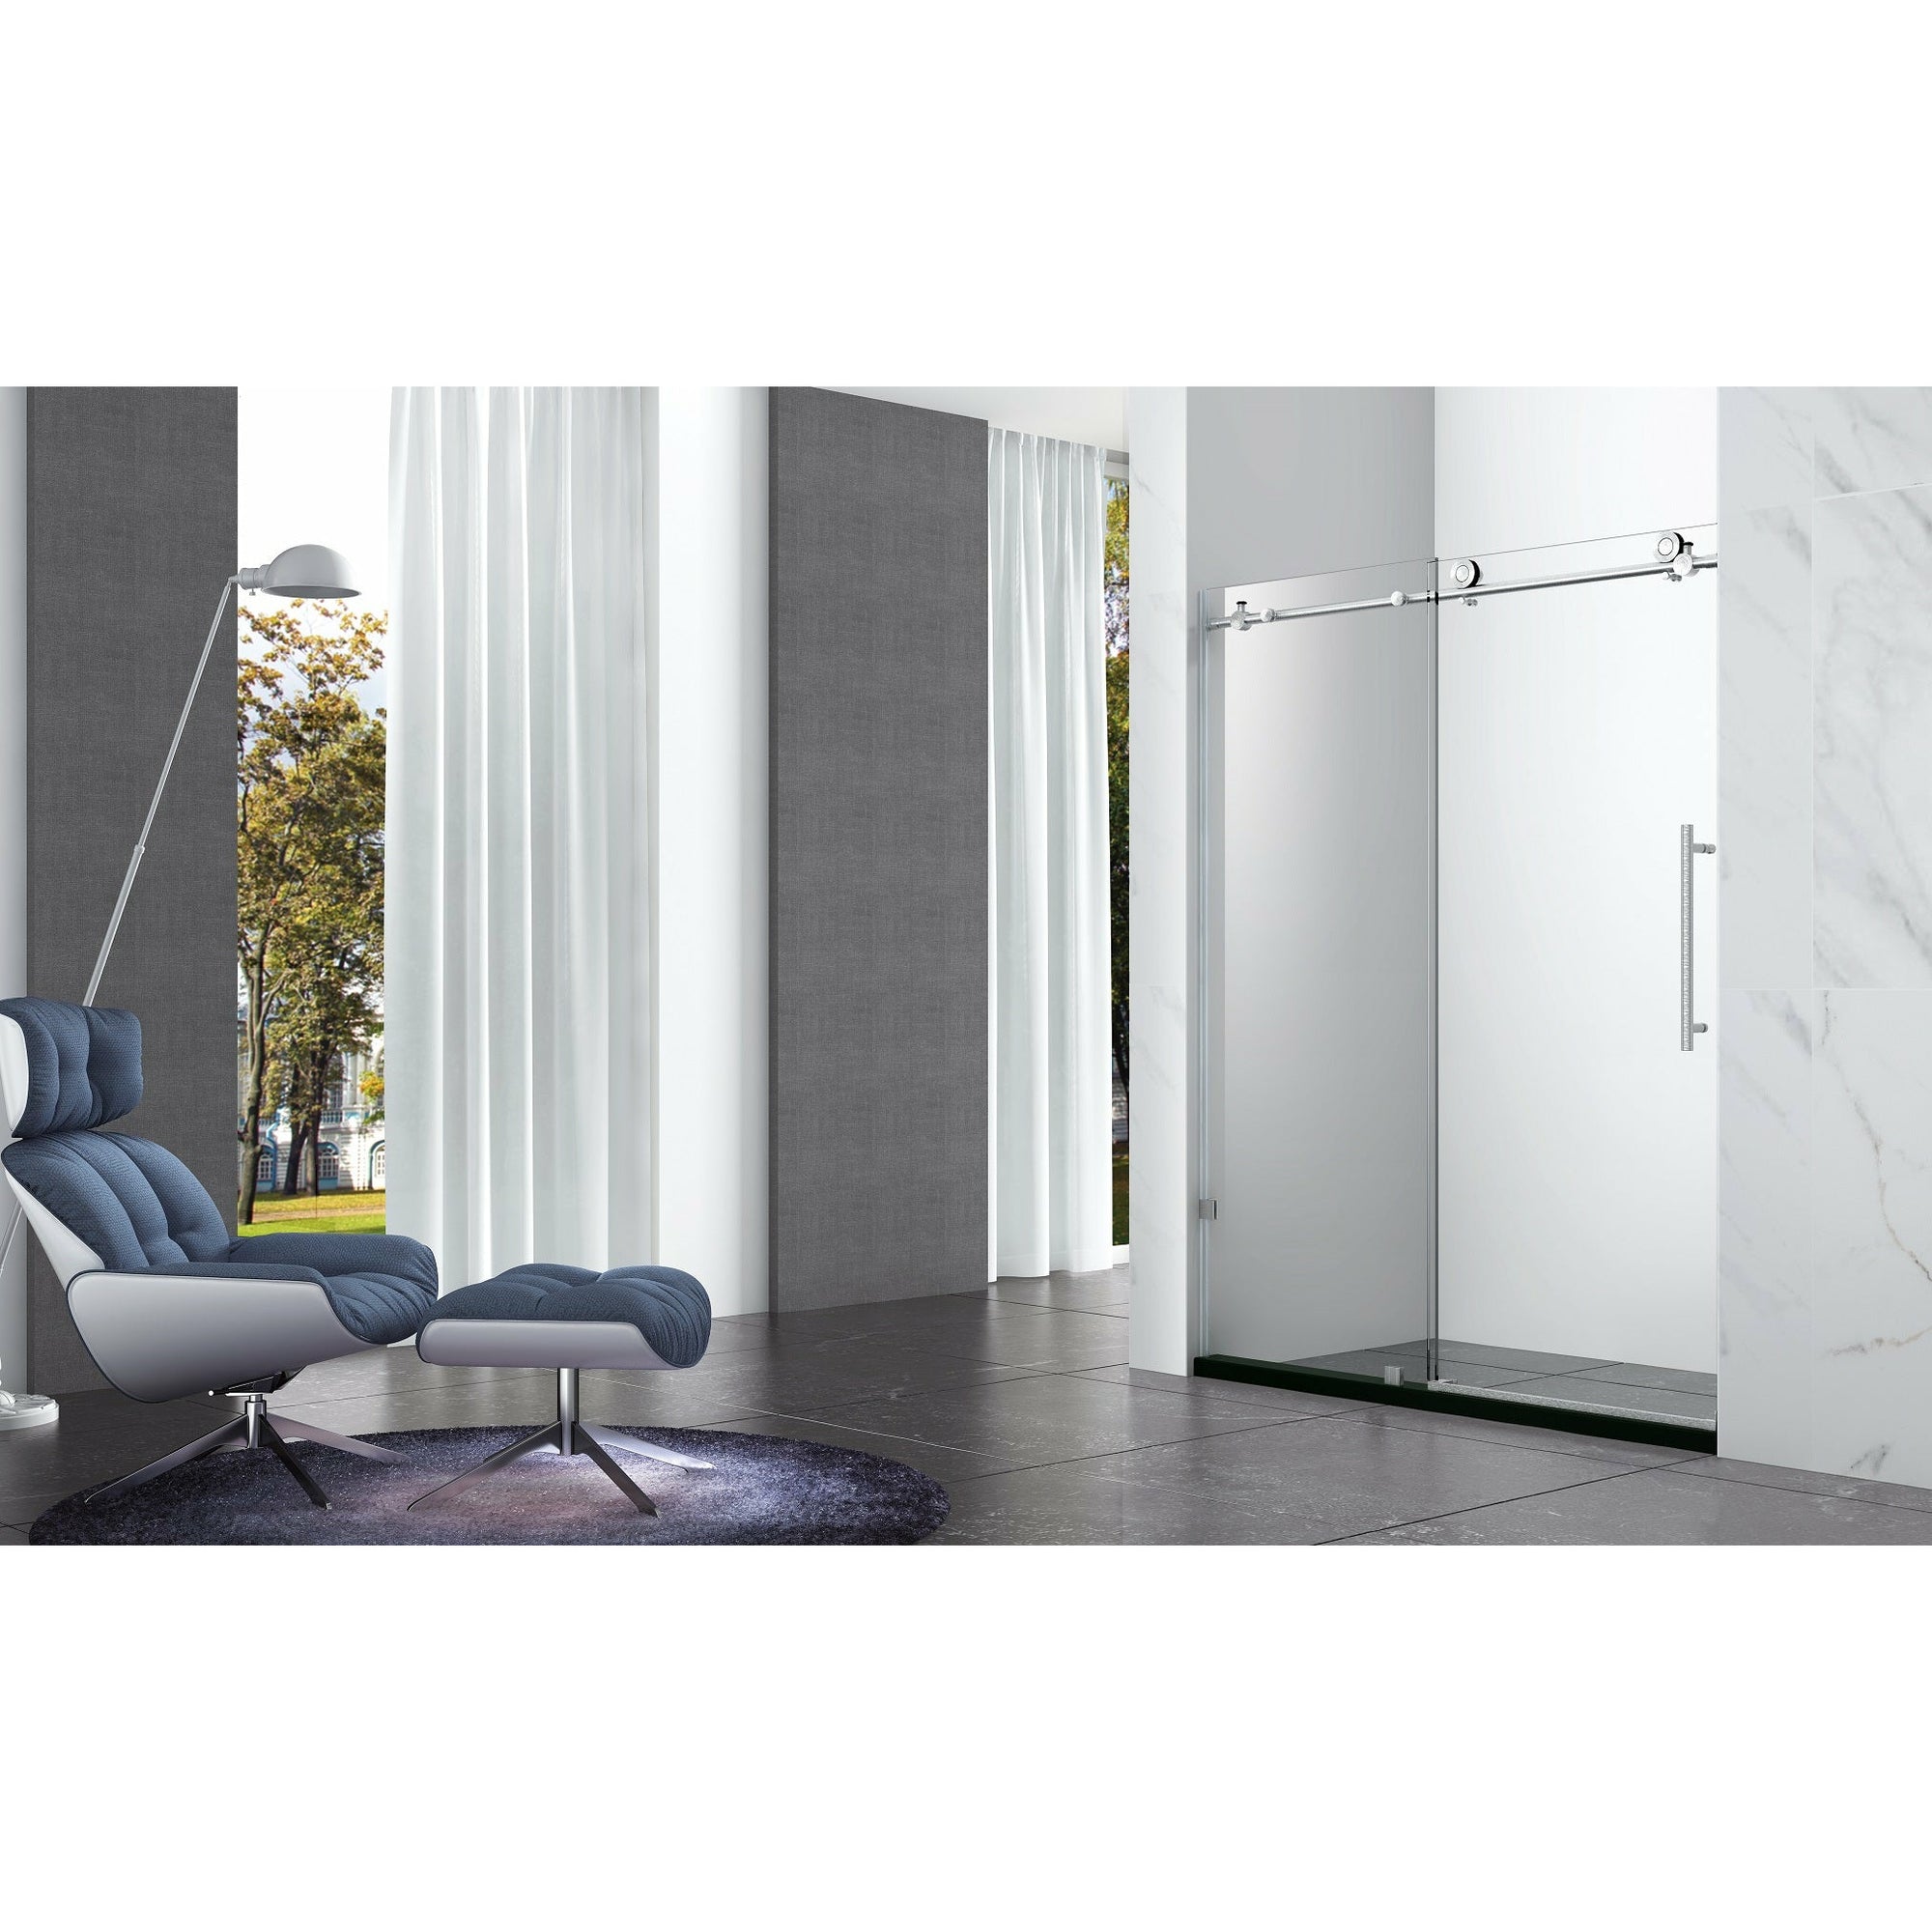 Legion Furniture GD9056-60 56" - 60" Single Sliding Shower Door Set With Hardware GD9056-60 - Glass Type: Clear - Stainless Steel Construction - Black - Steel Rollers Closing - Overall Size: 60″ W X 65″ H - Lifestyle Setting - GD9056-60 - Vital Hydrotherapy